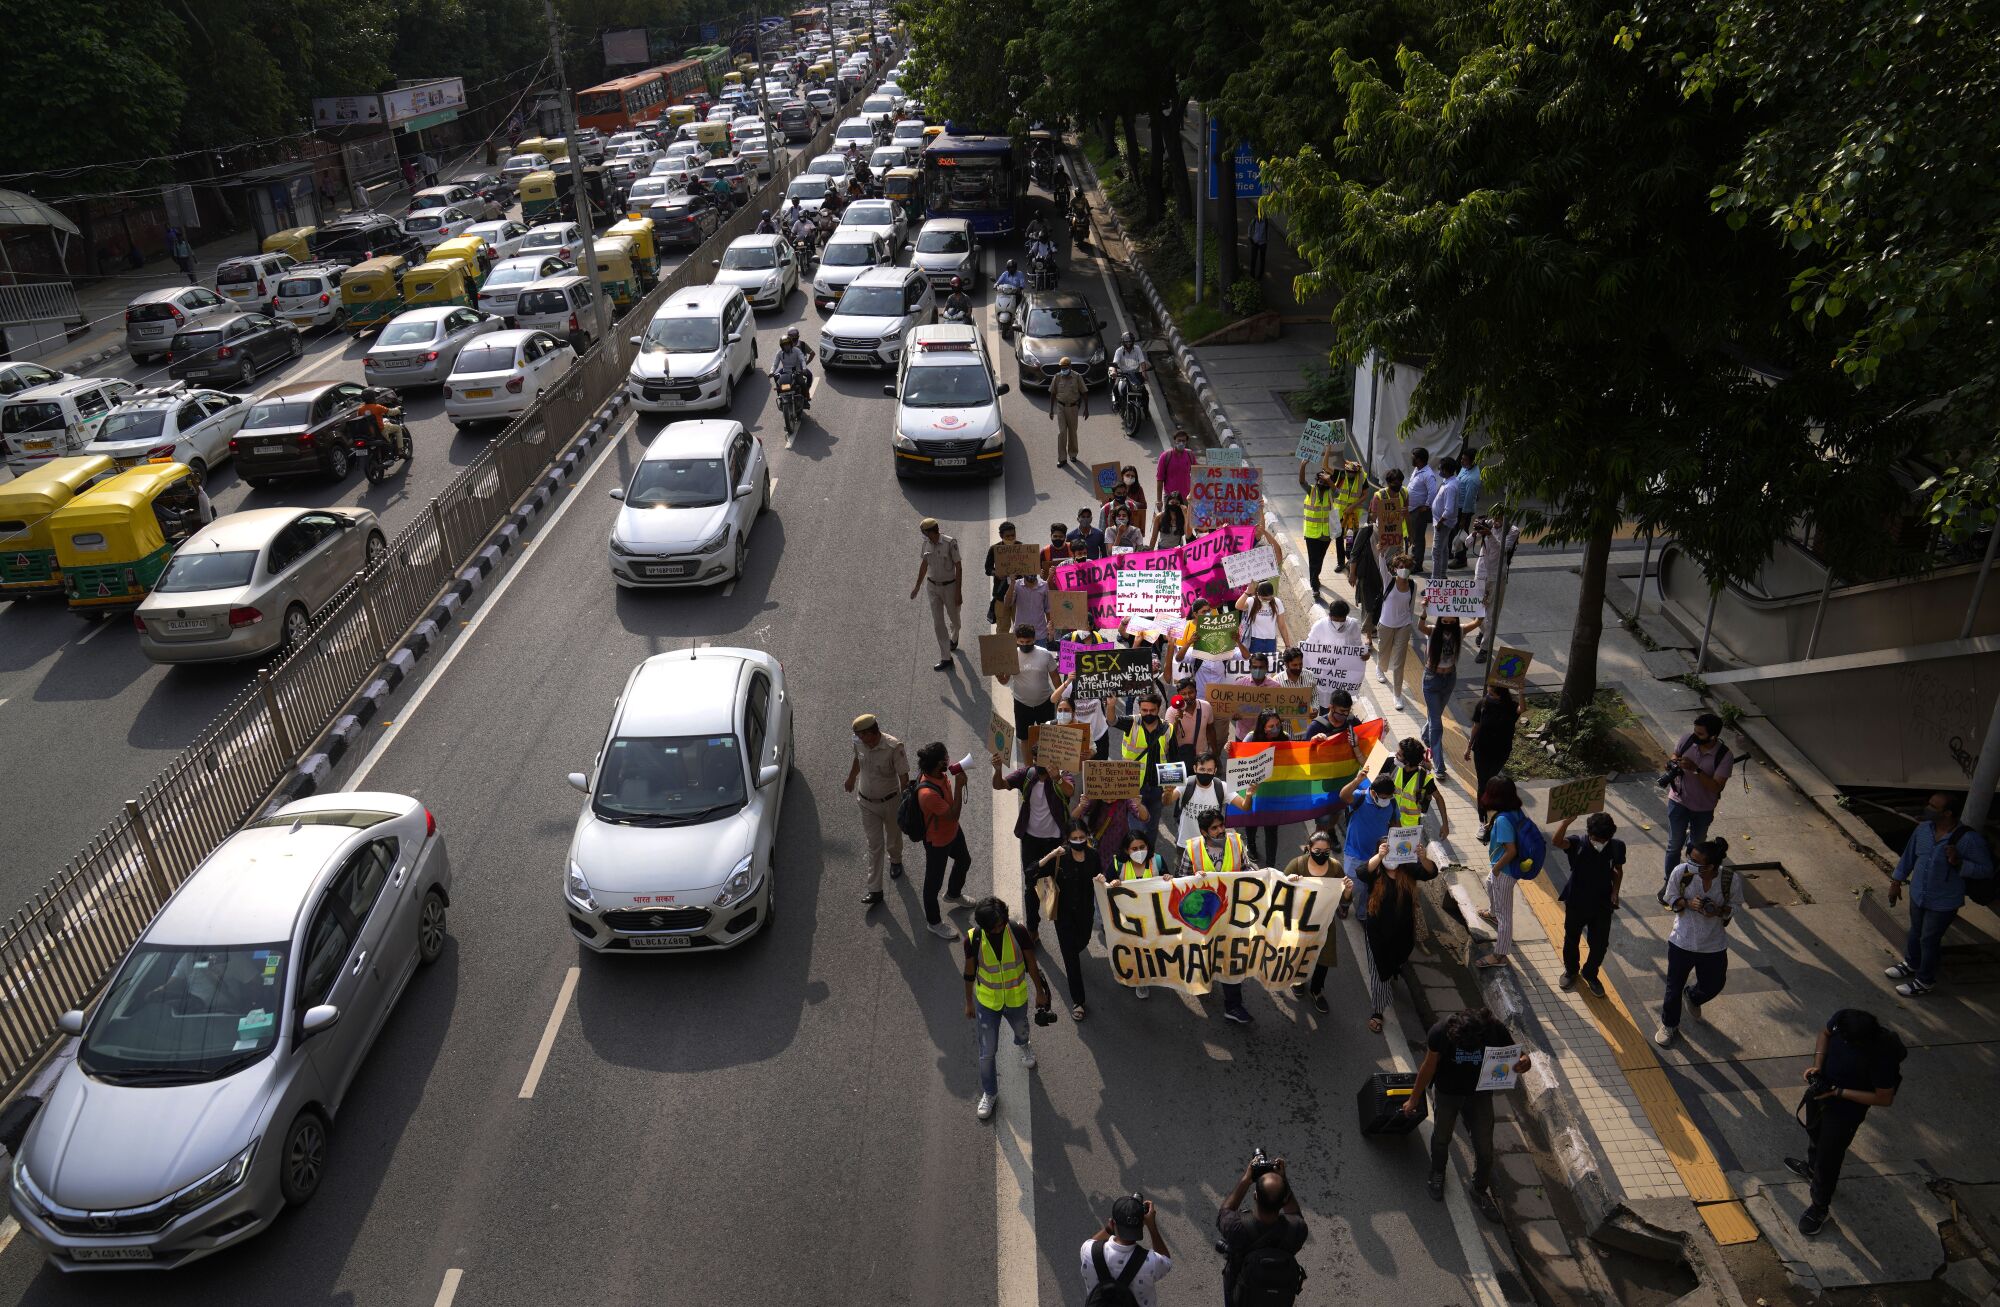 Activists participate in a protest march as part of the Fridays for Future climate movement's initiatives in India.